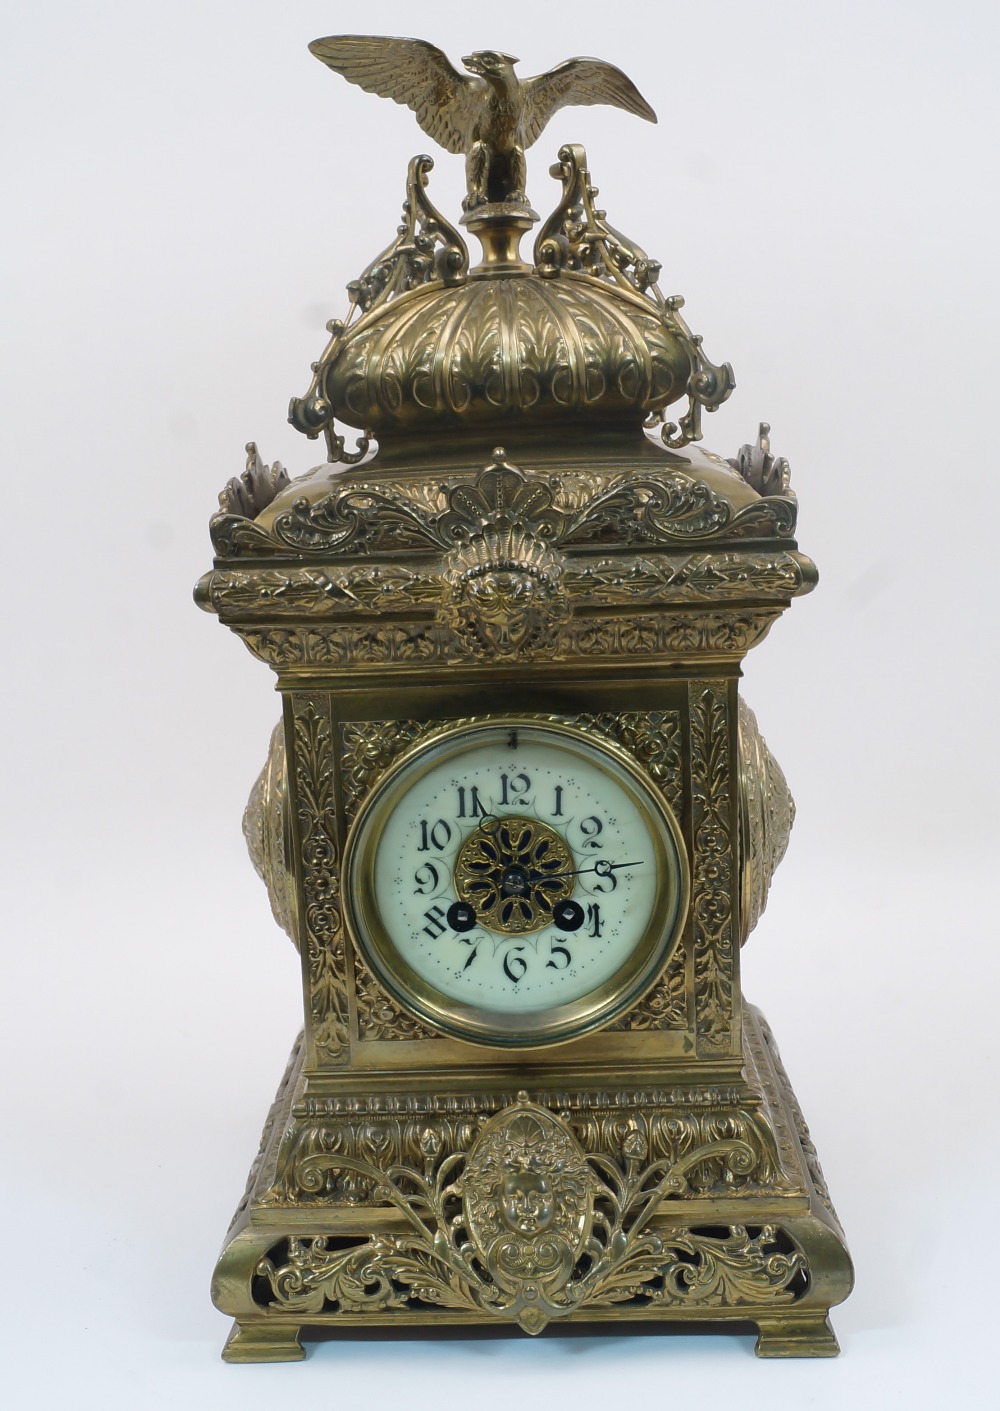 A French gilt-brass mantel clock, late 19th century, the architectural case surmounted with an eagle